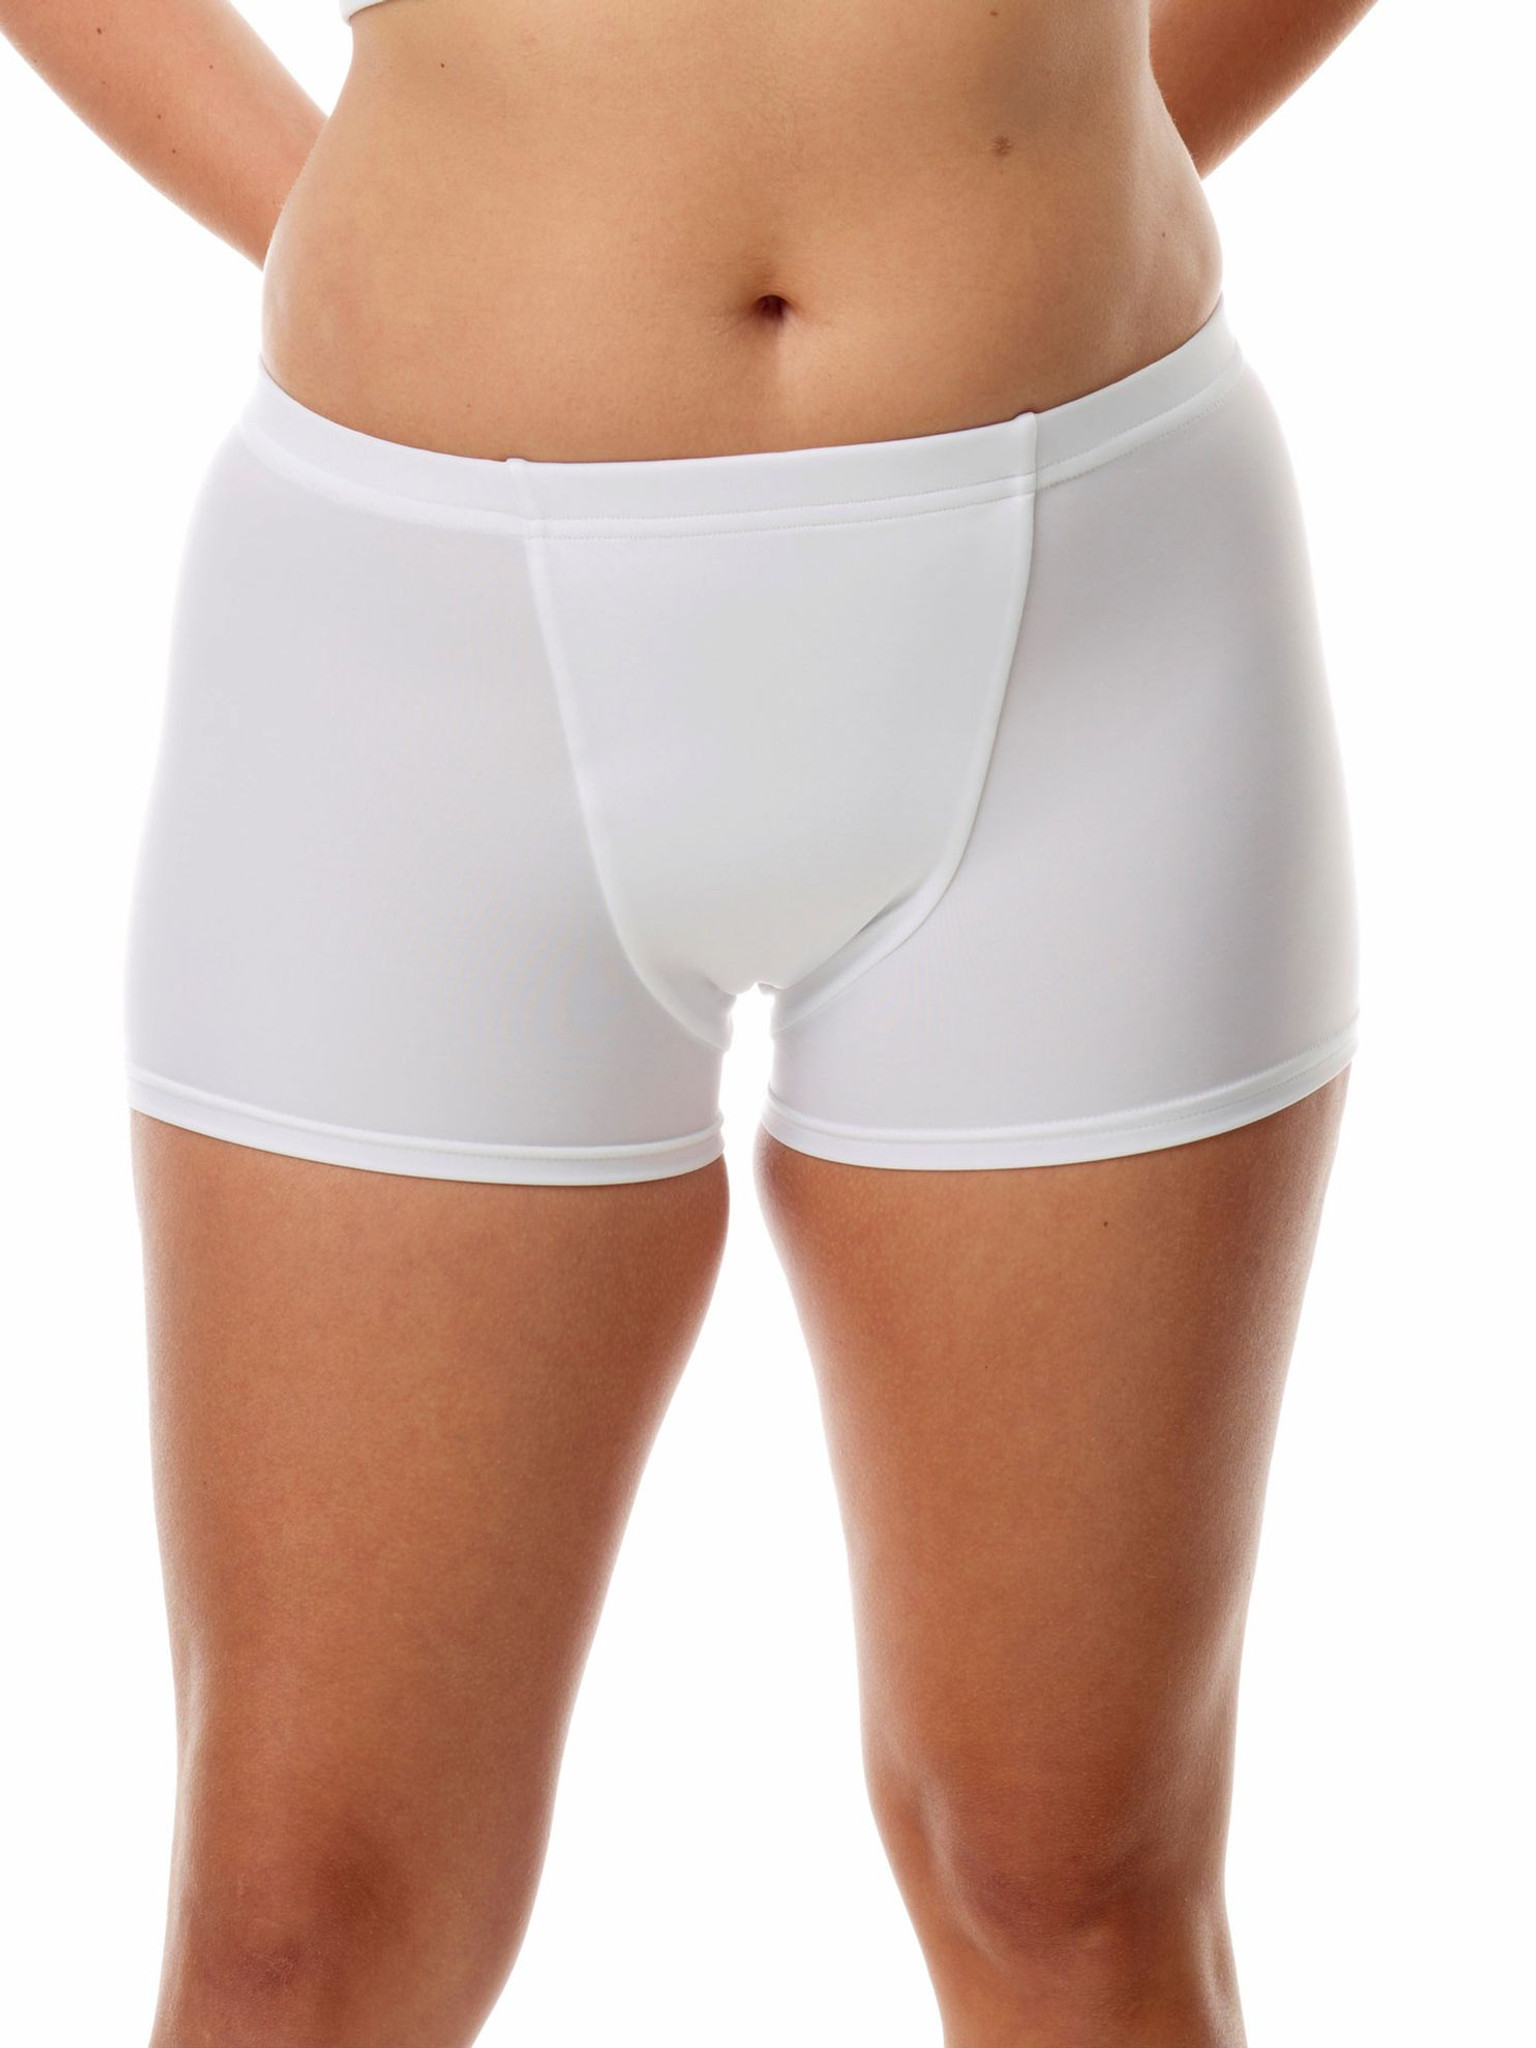 Compression Shorts for Women Multiple Uses , Post Partum, Hernia  prevention, Gym or Yoga - Liposuction Healing Foam, Lipo Foam